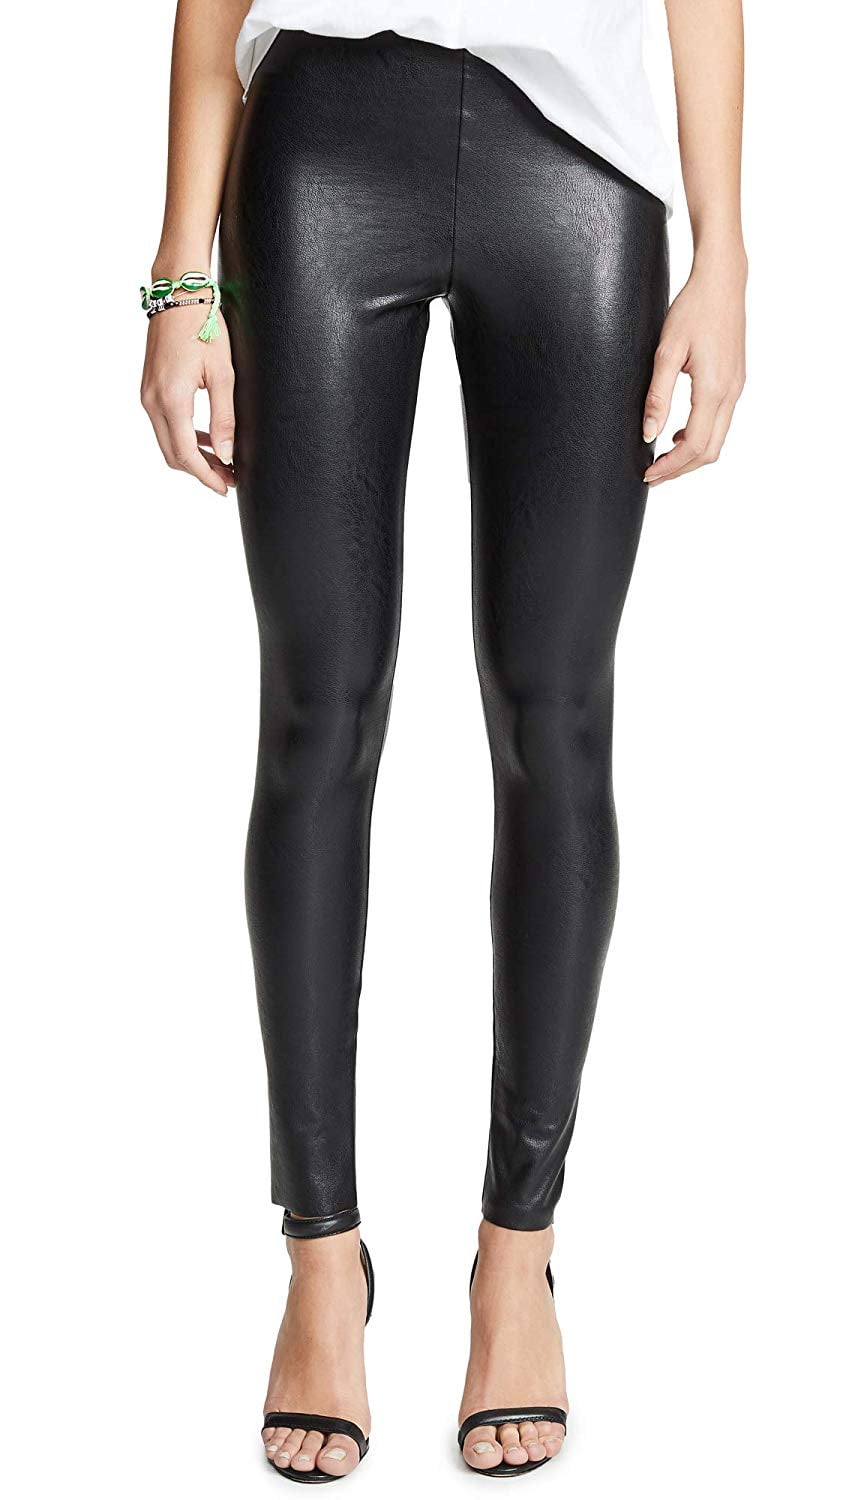 Commmando BLACK Faux Leather Legging with Perfect Control, US X